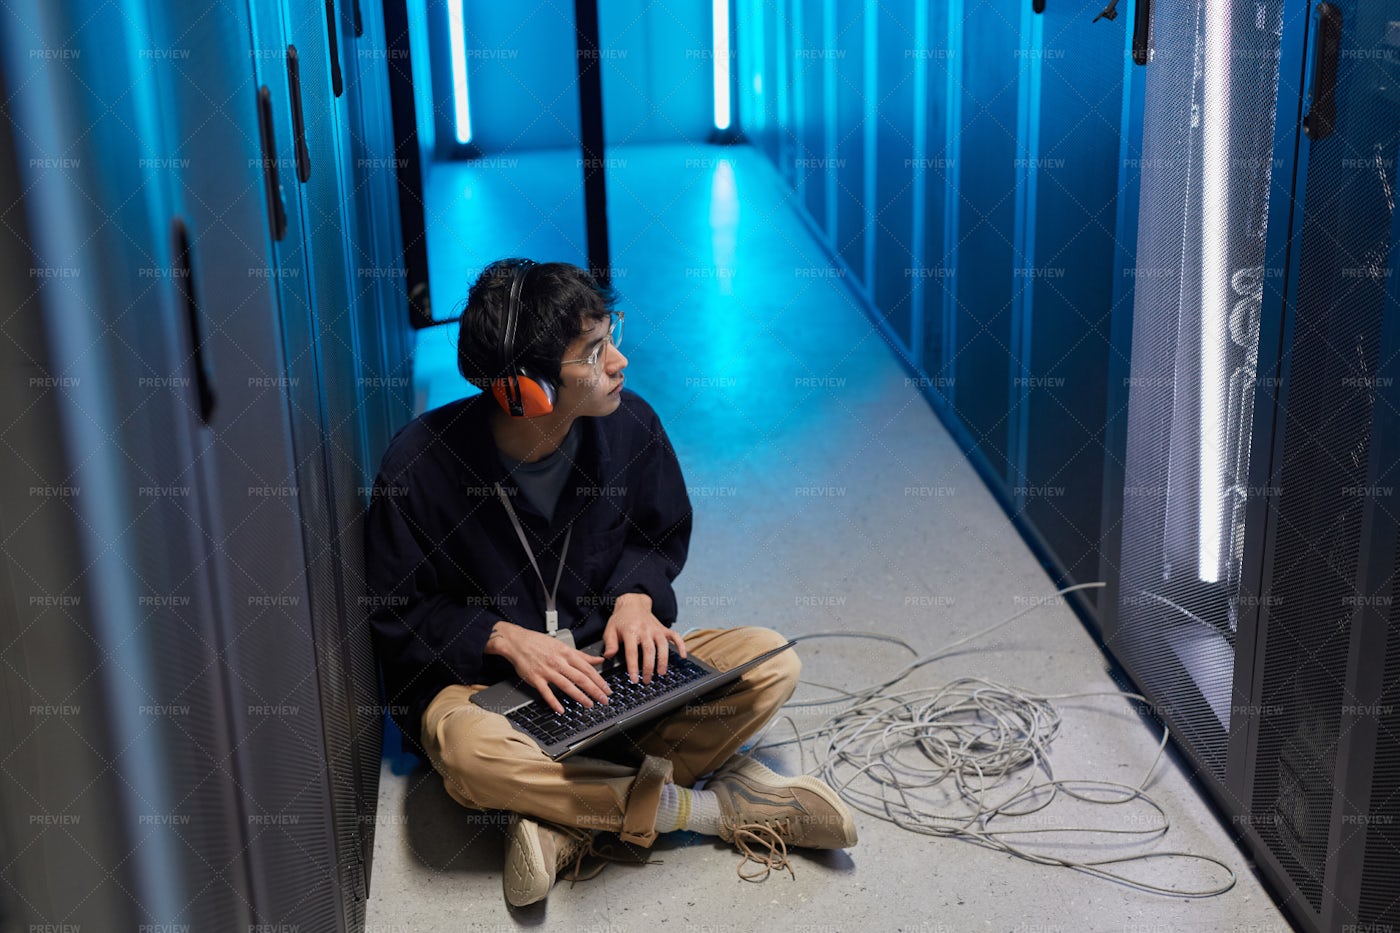 Engineer In The Server Room: Stock Photos